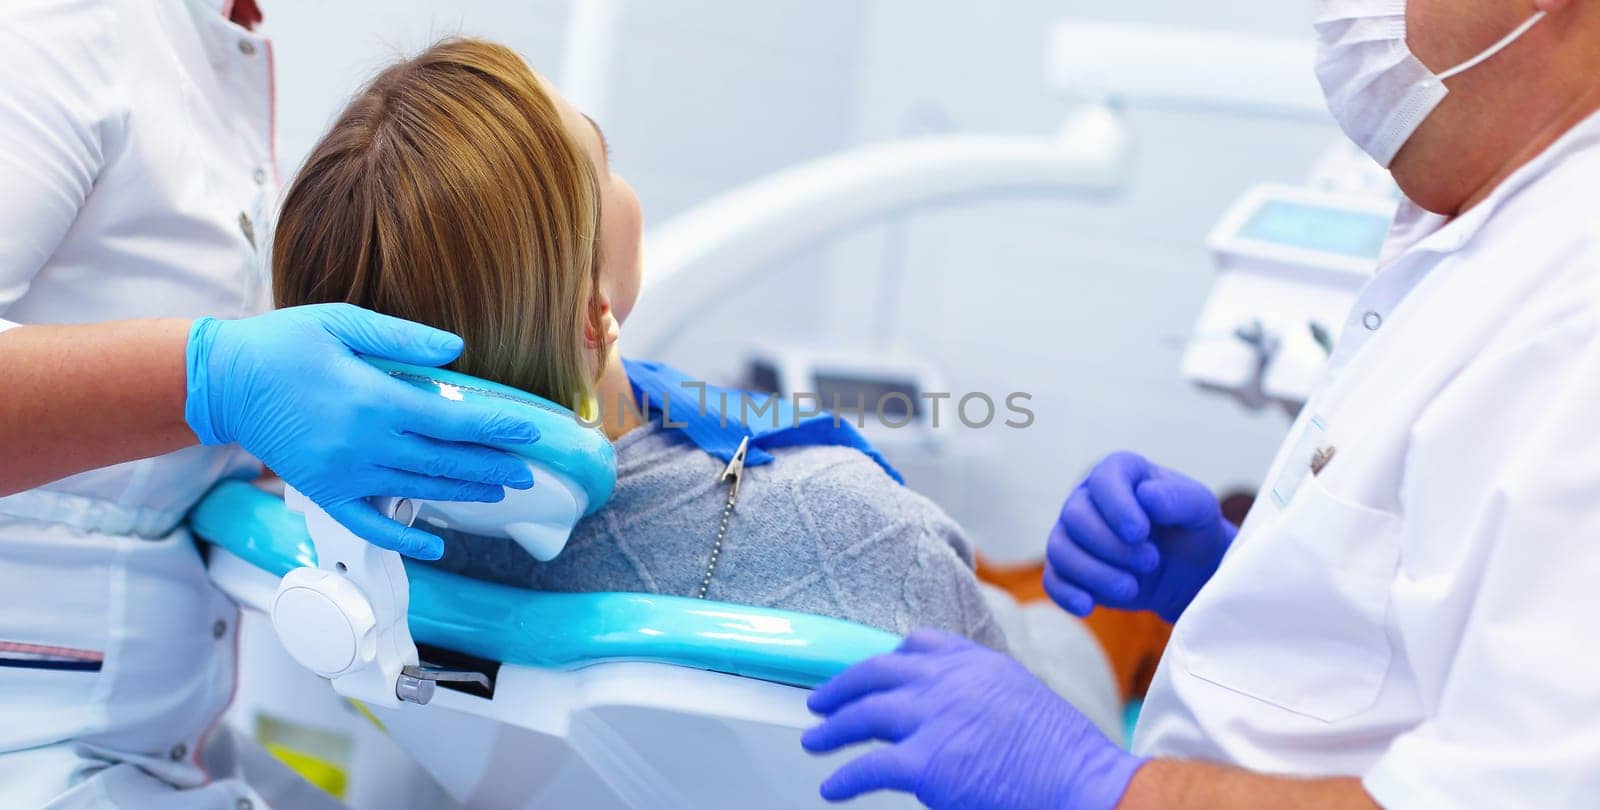 Senior male dentist in dental office talking with female patient and preparing for treatment.